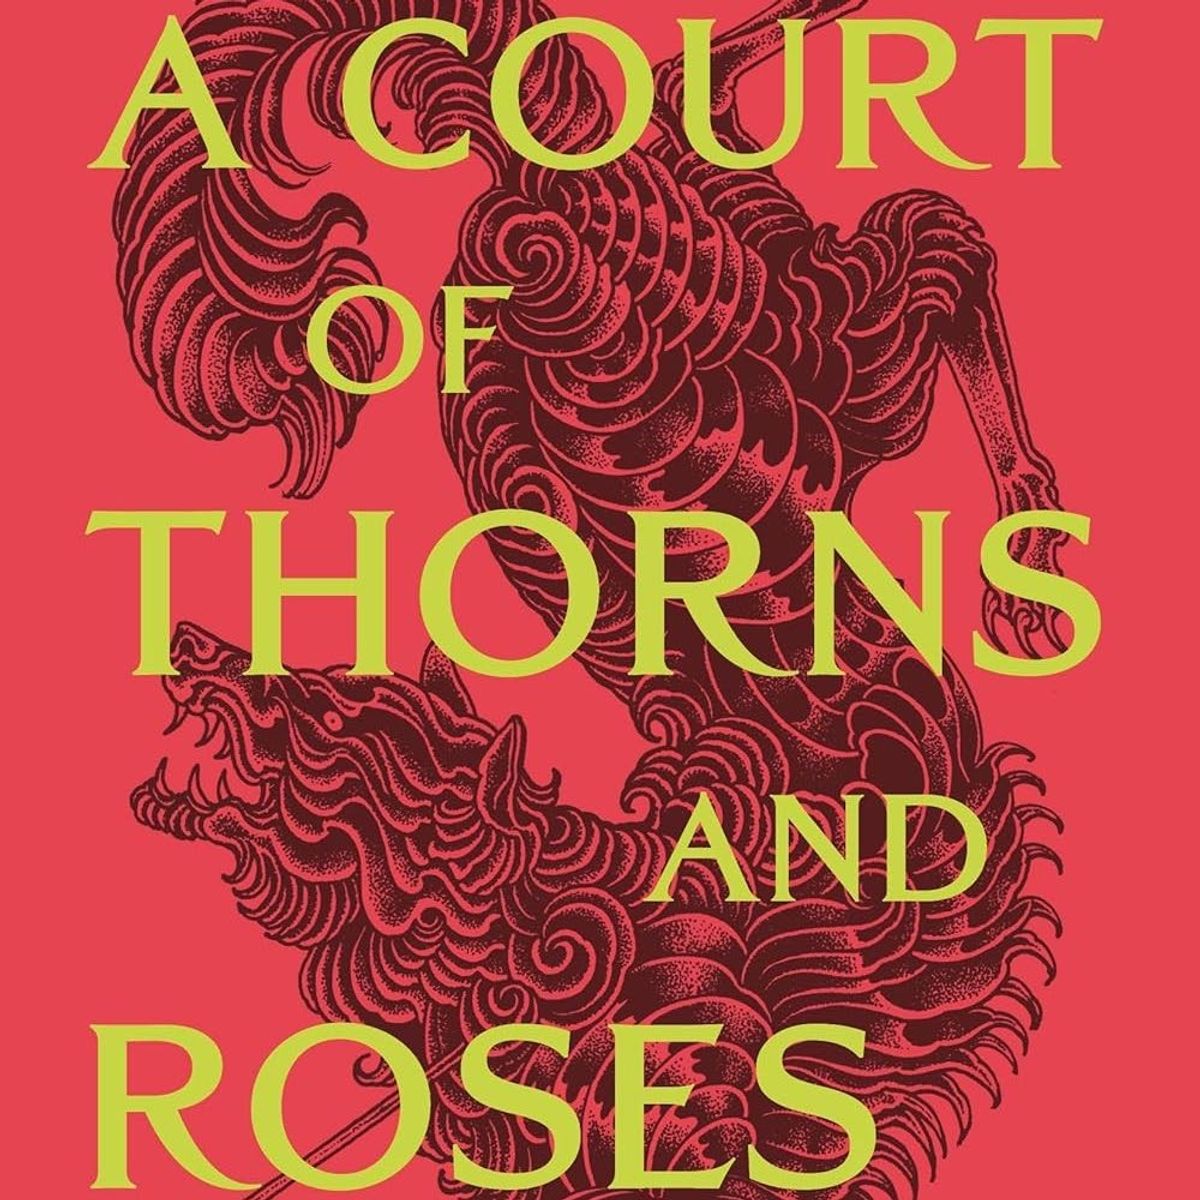 A Court Of Thorns And Roses TV Show